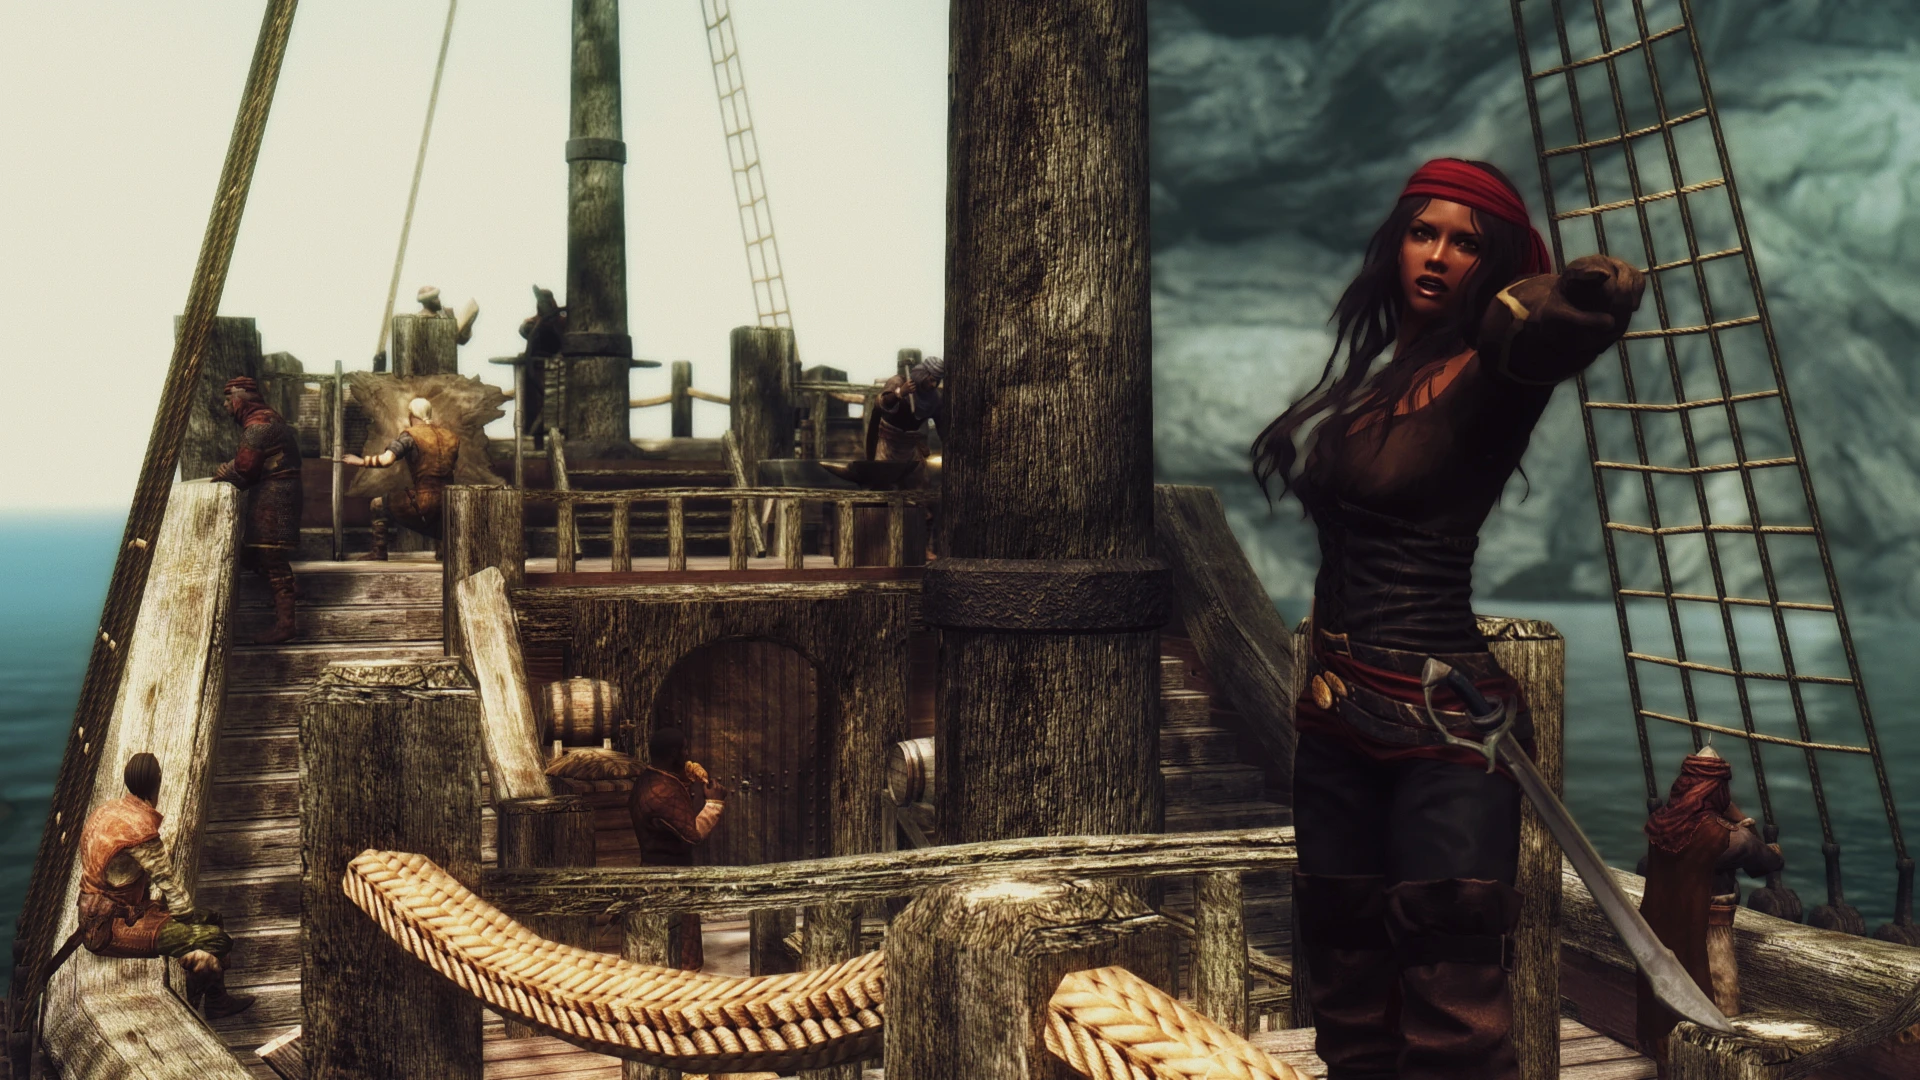 Yisra the pirate.